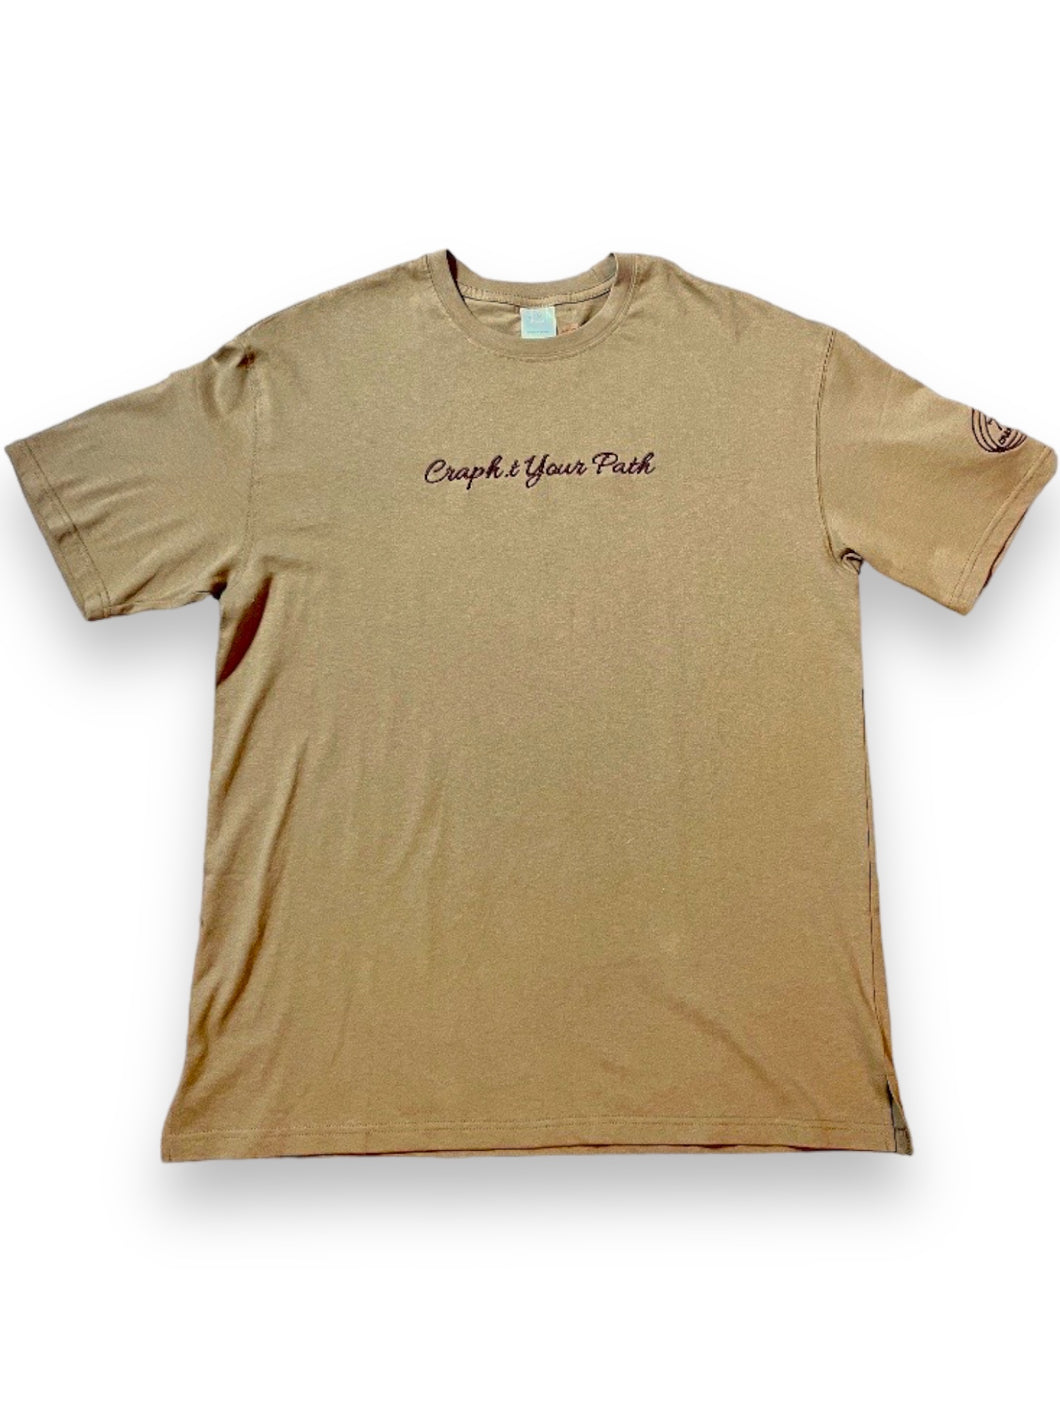 CRAPHT YOUR PATH T-Shirt (Brown)